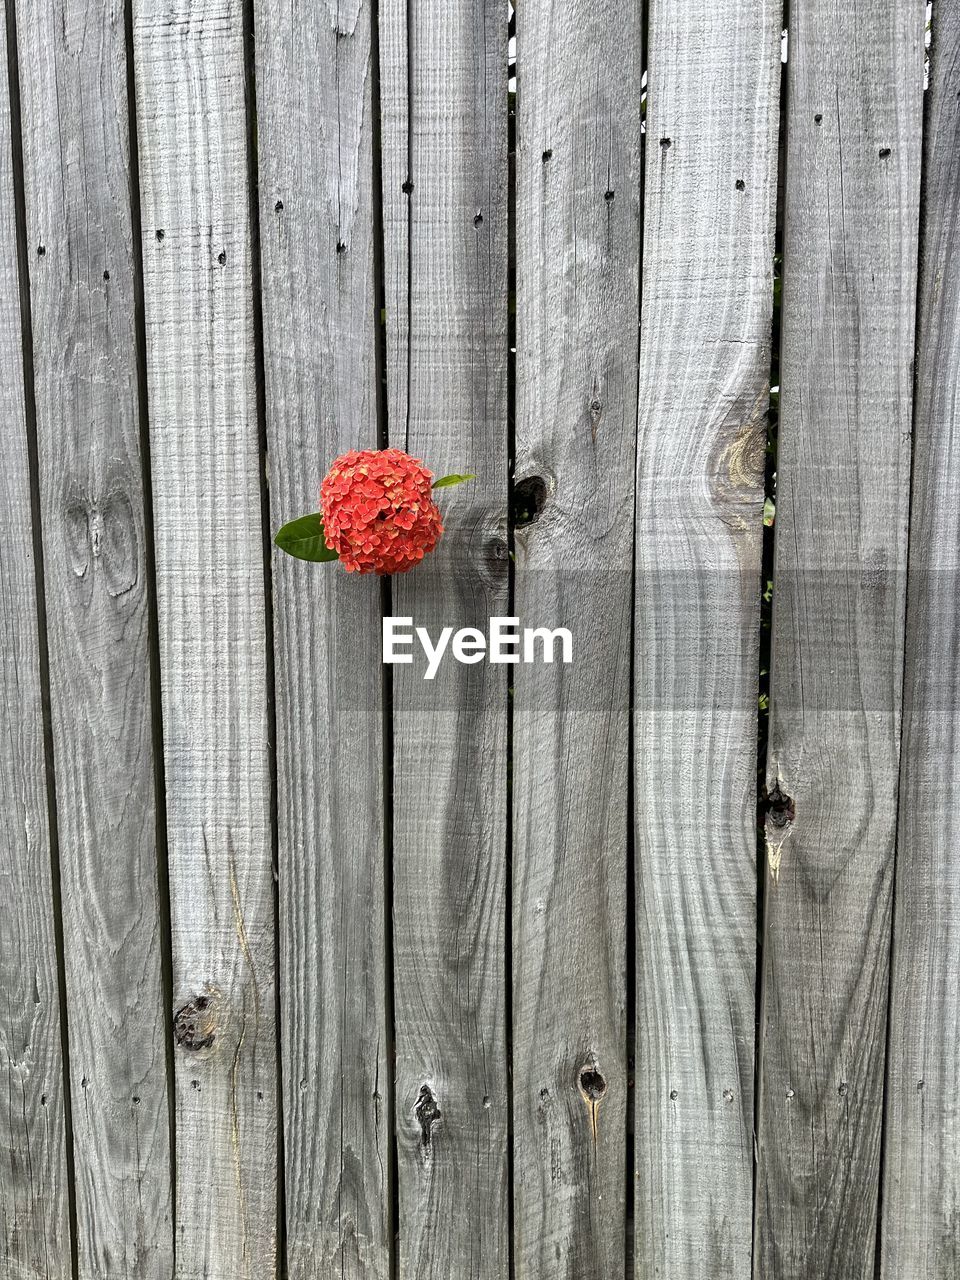 wood, no people, full frame, red, textured, plank, backgrounds, pattern, close-up, day, plant, leaf, flower, nature, outdoors, boardwalk, wall, flowering plant, directly above, freshness